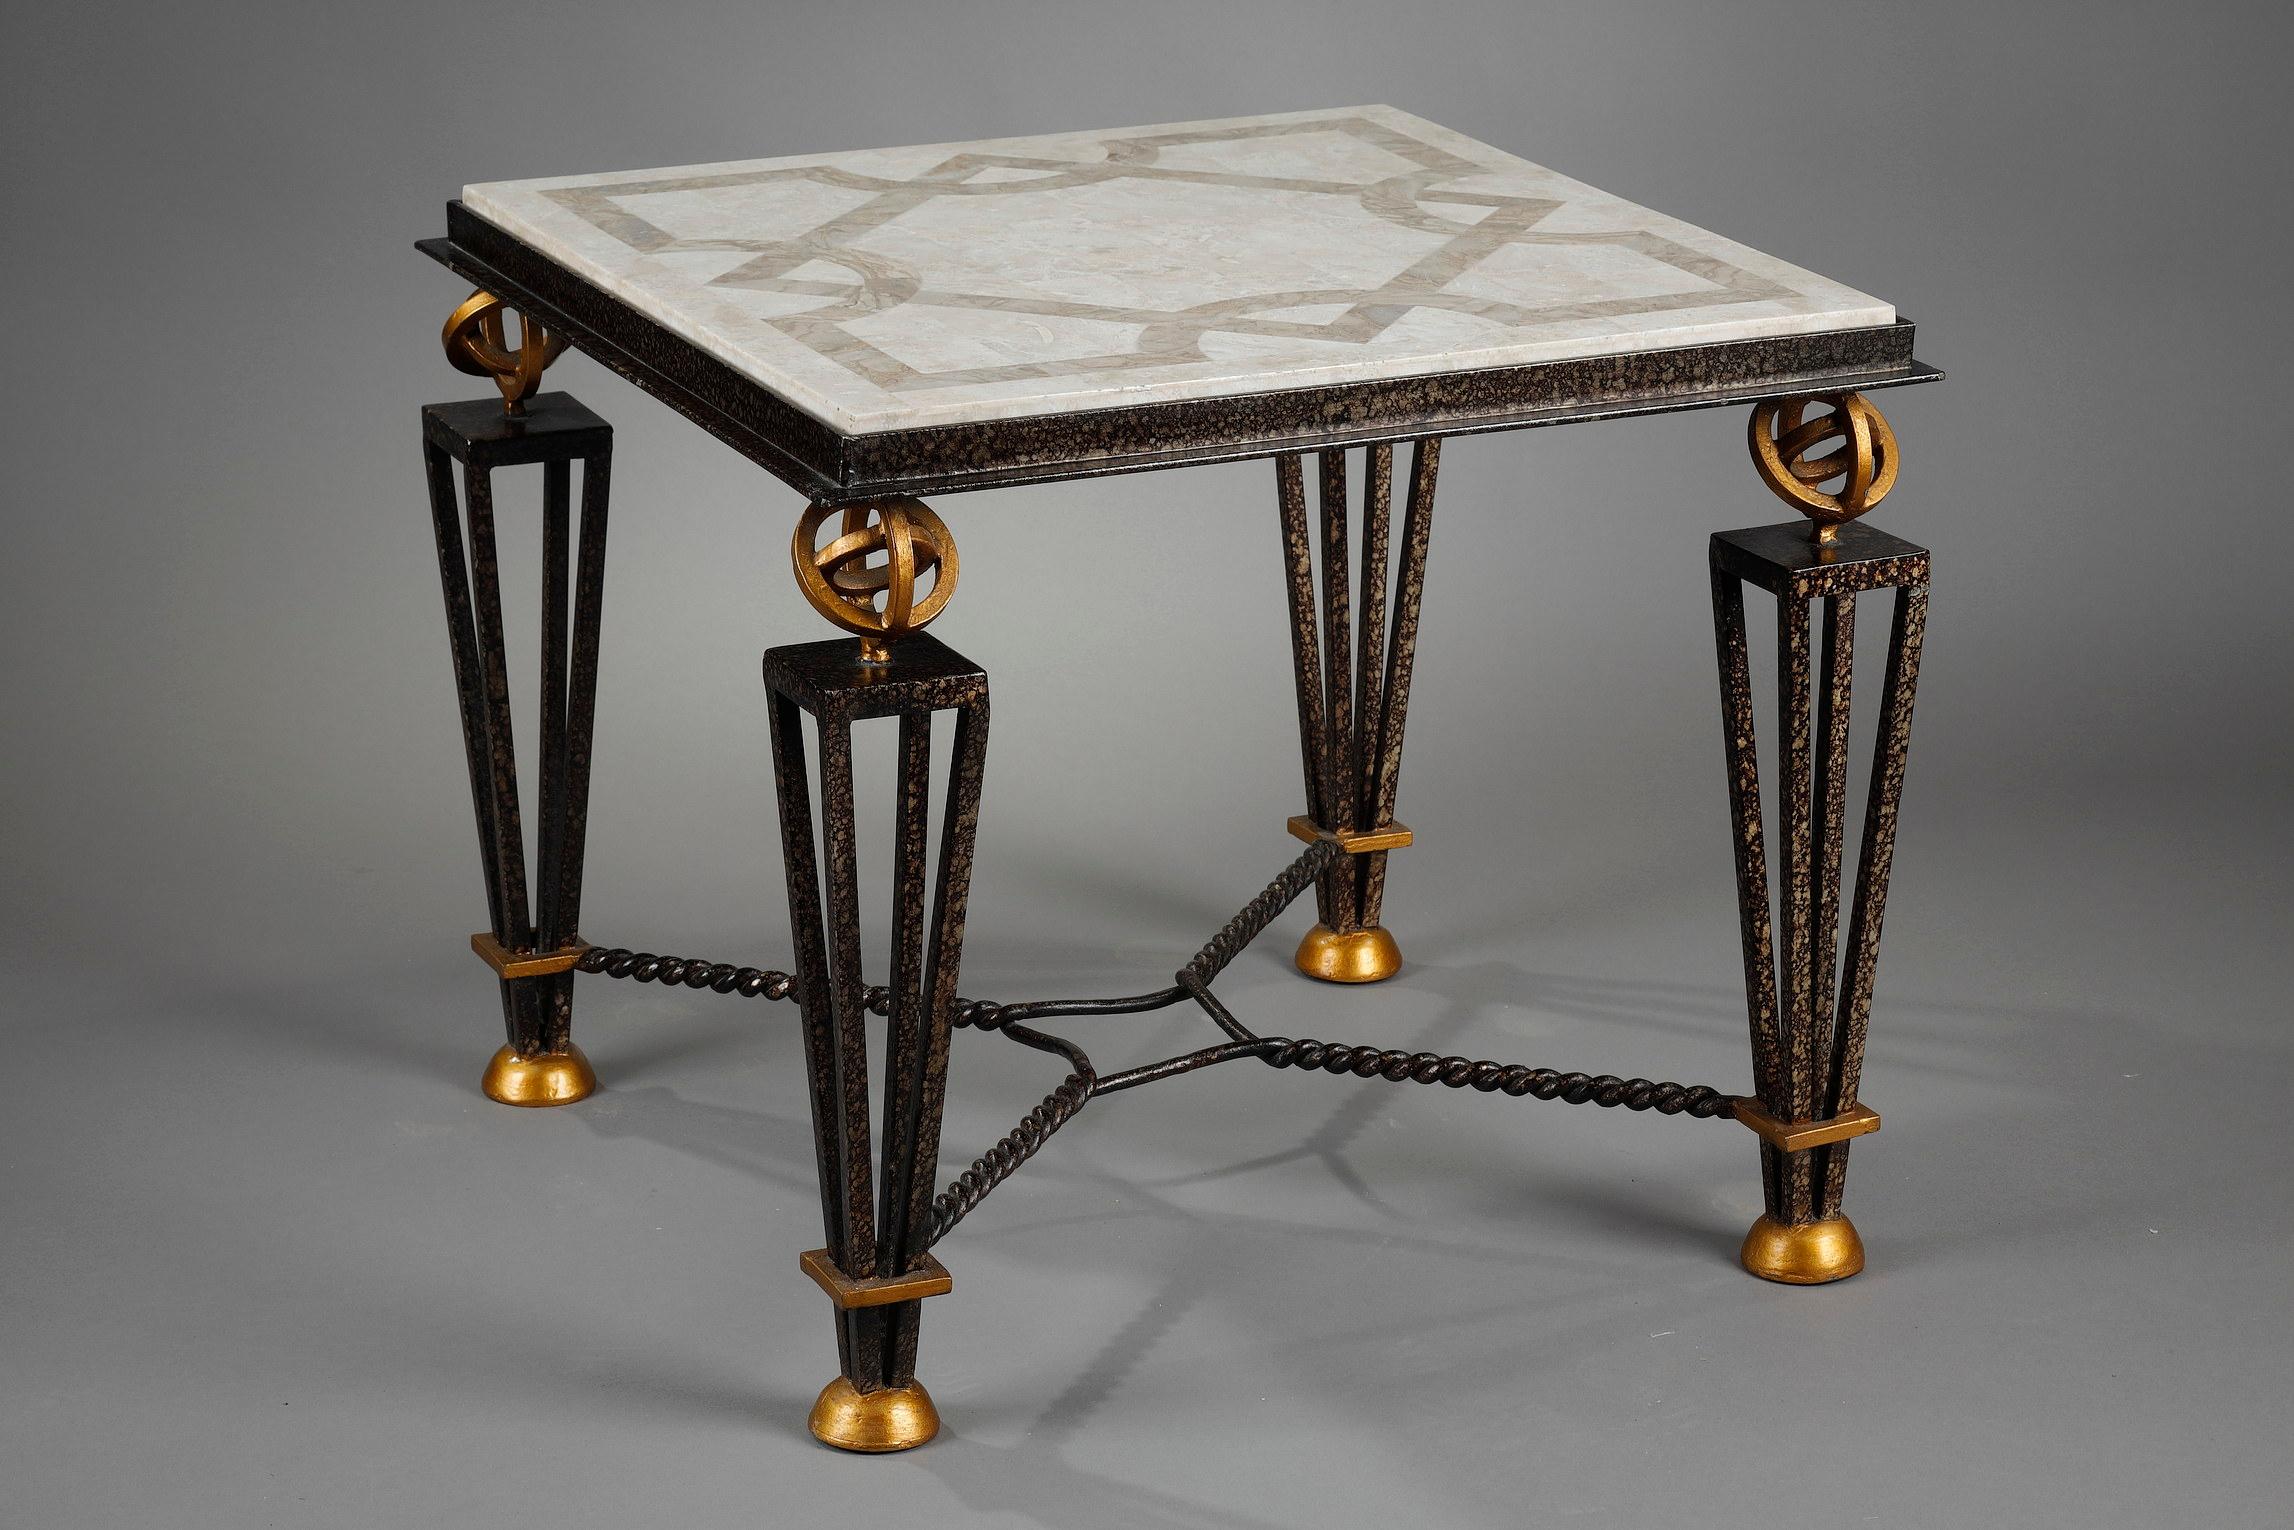 Gilt Table in Marquetry of Stone with Metal Feet in the Taste of Gilbert Poillerat